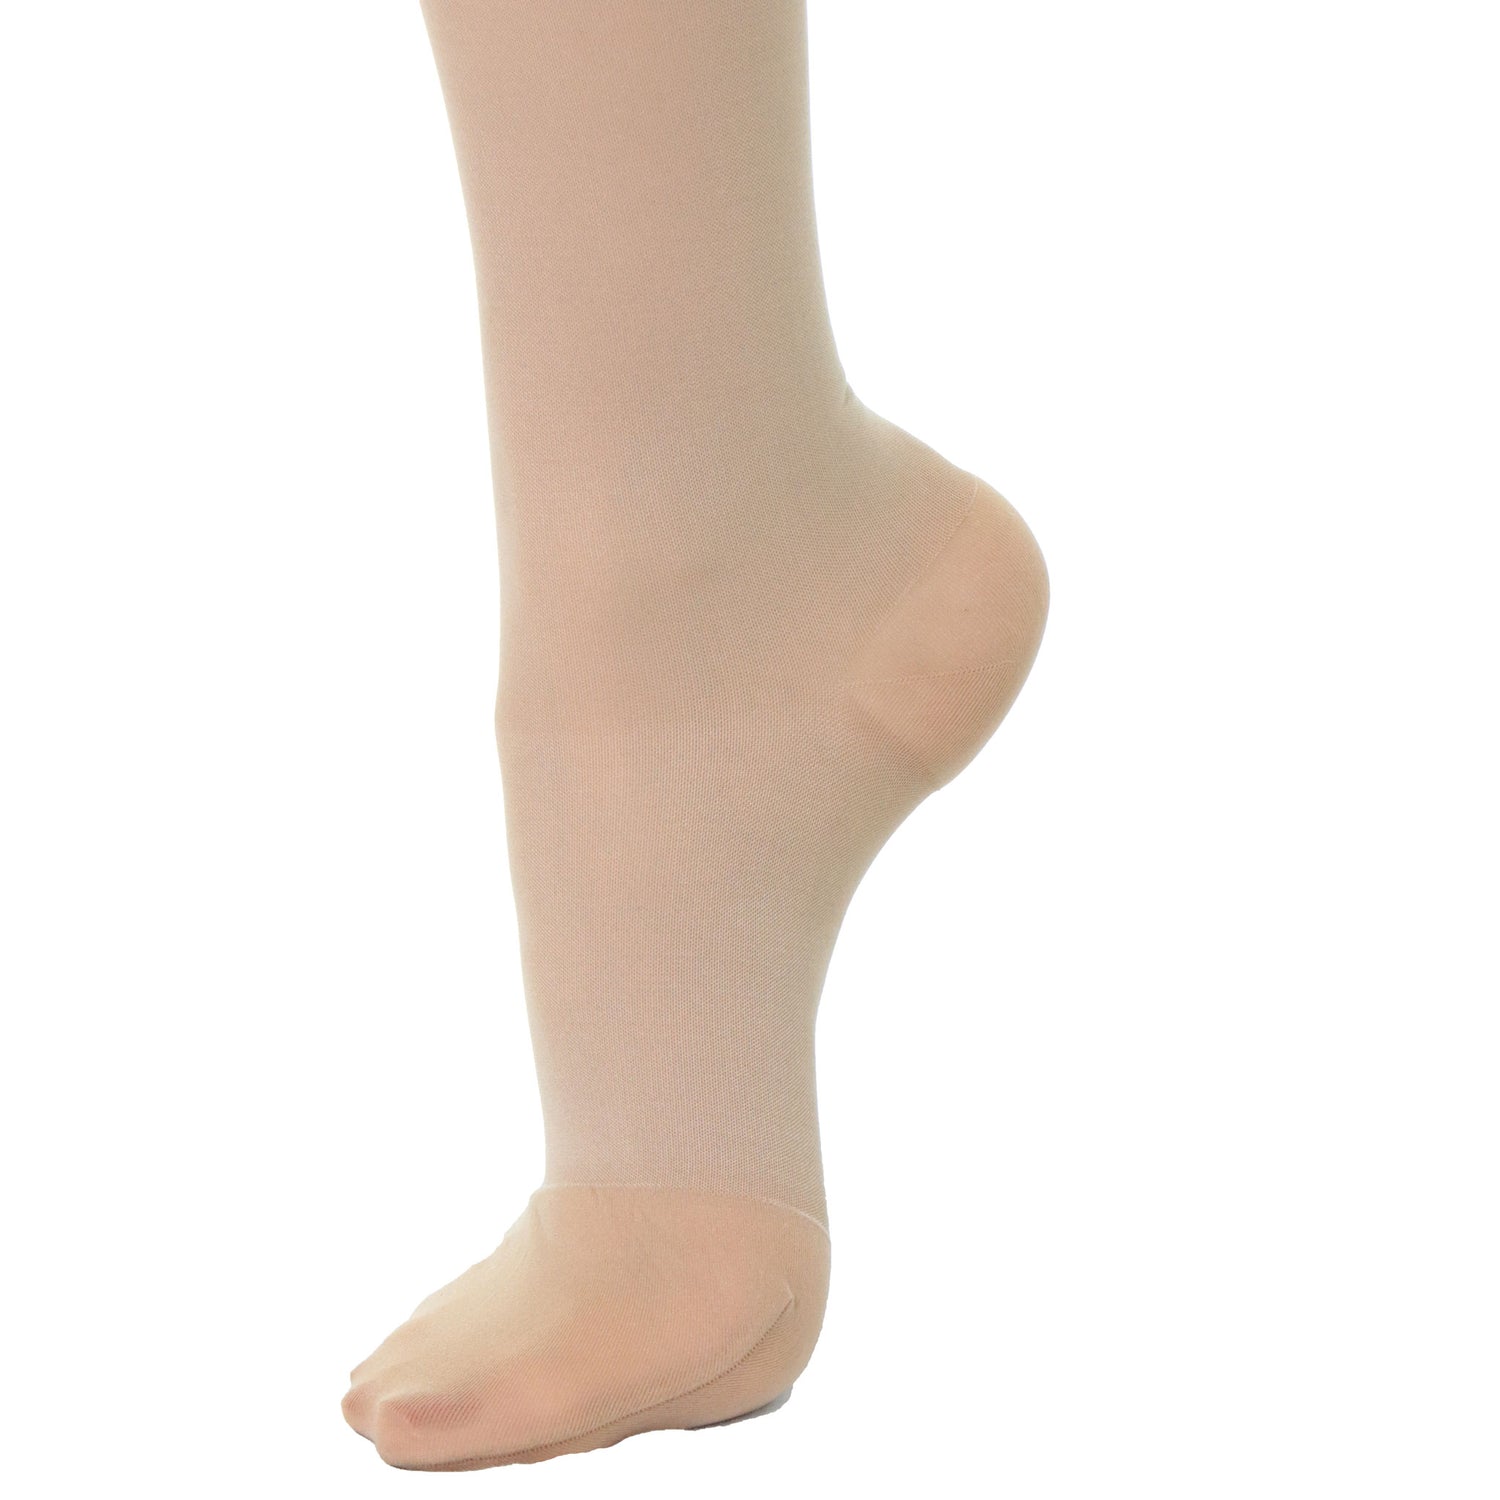 Compression Pantyhose For Women In 20 30 mmHg CircuTrend